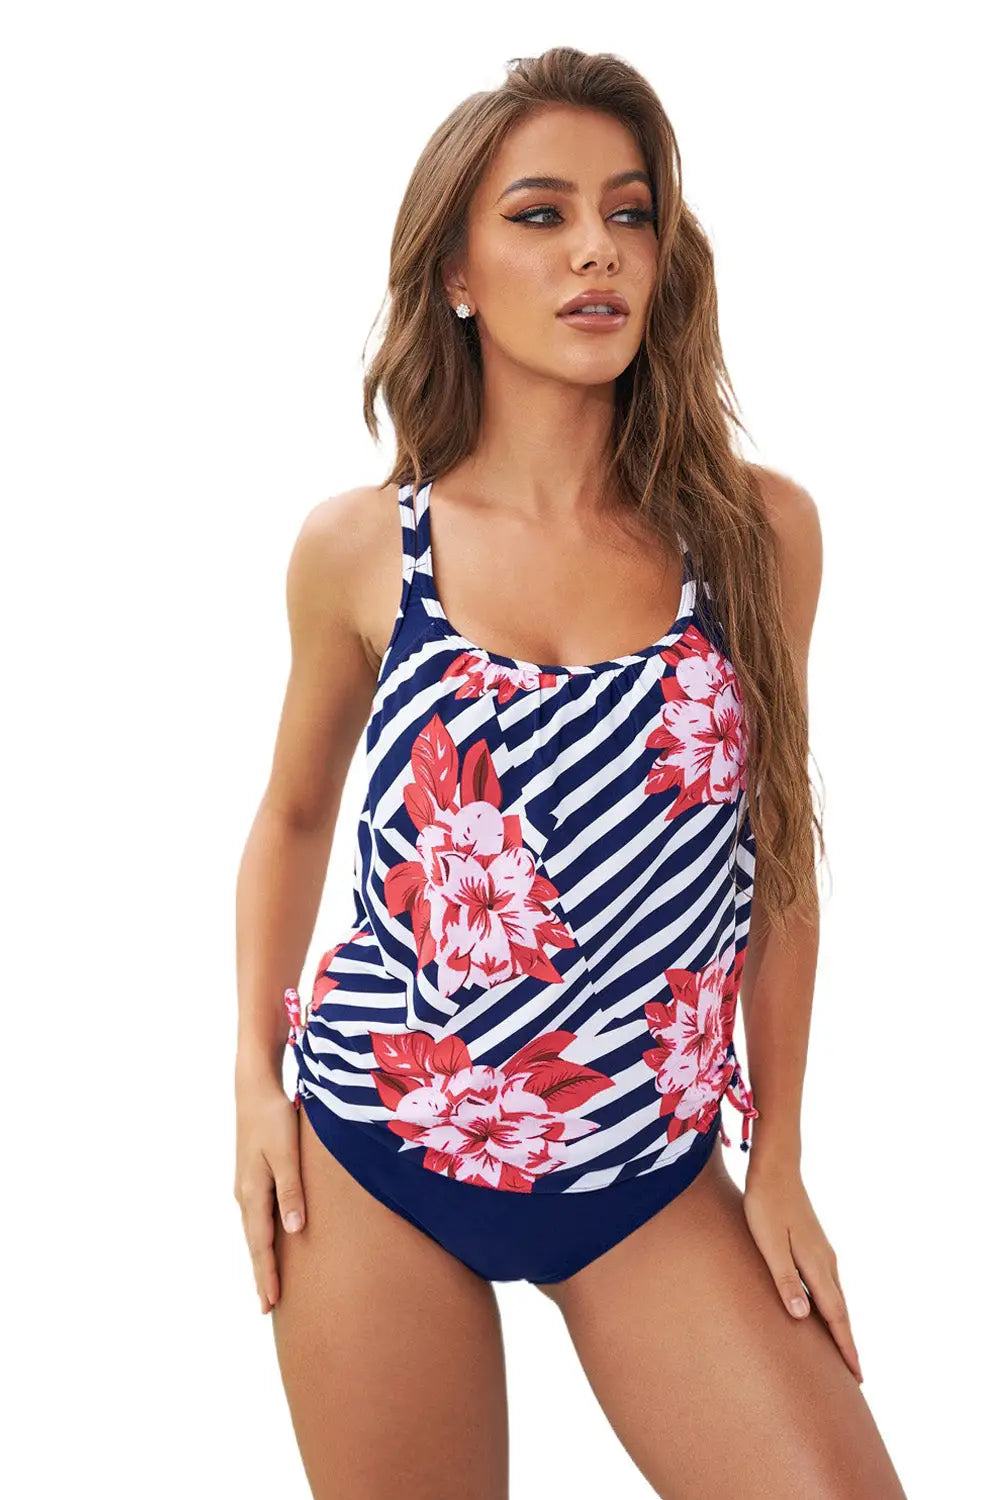 Blue floral printed lined tankini swimsuit - tankinis